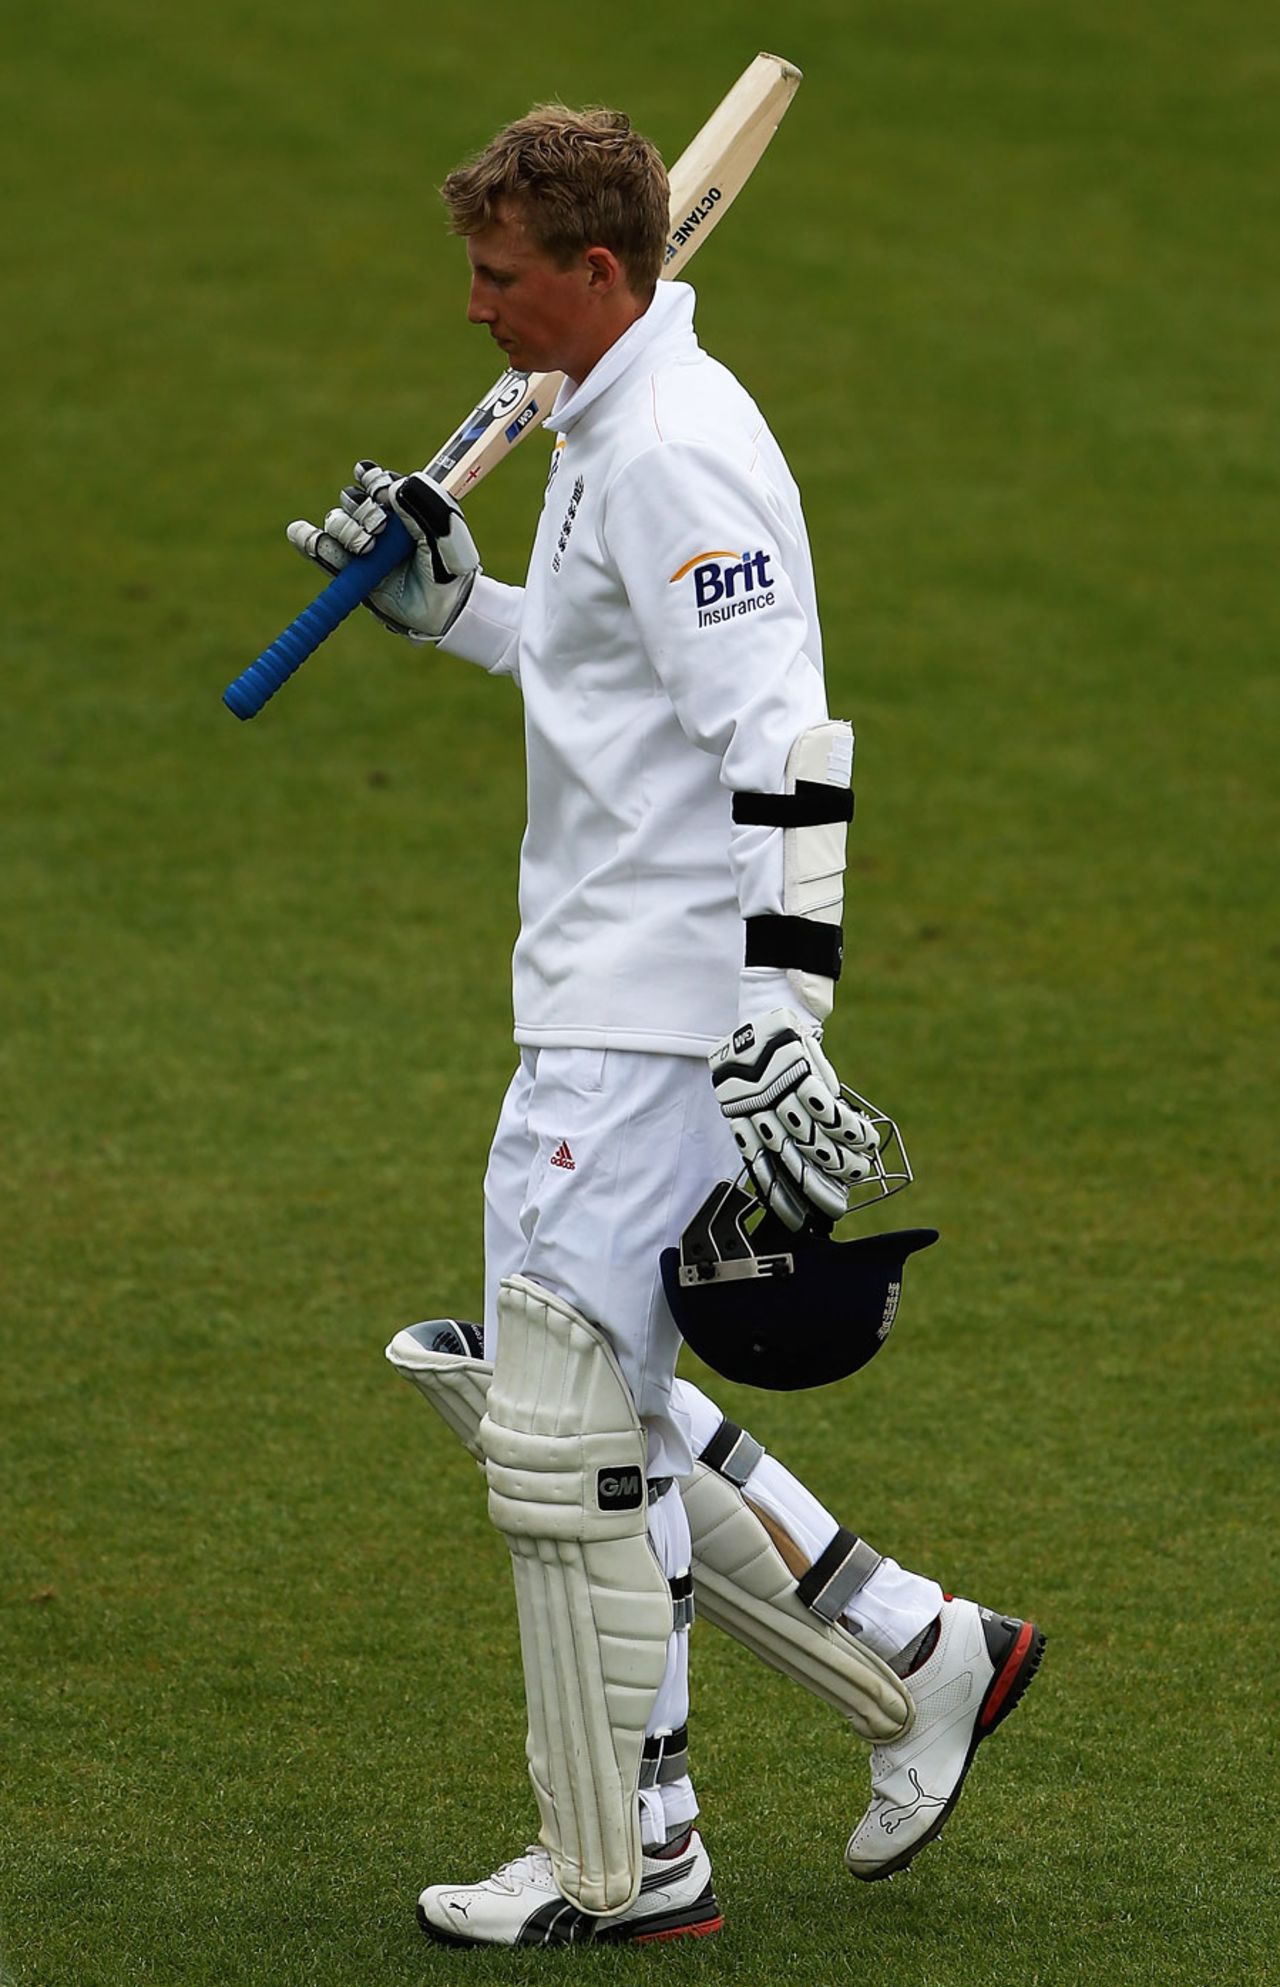 Joe Root walks off after making 179, England Lions v New Zealanders, Tour match, Grace Road, 4th day, May 12, 2013